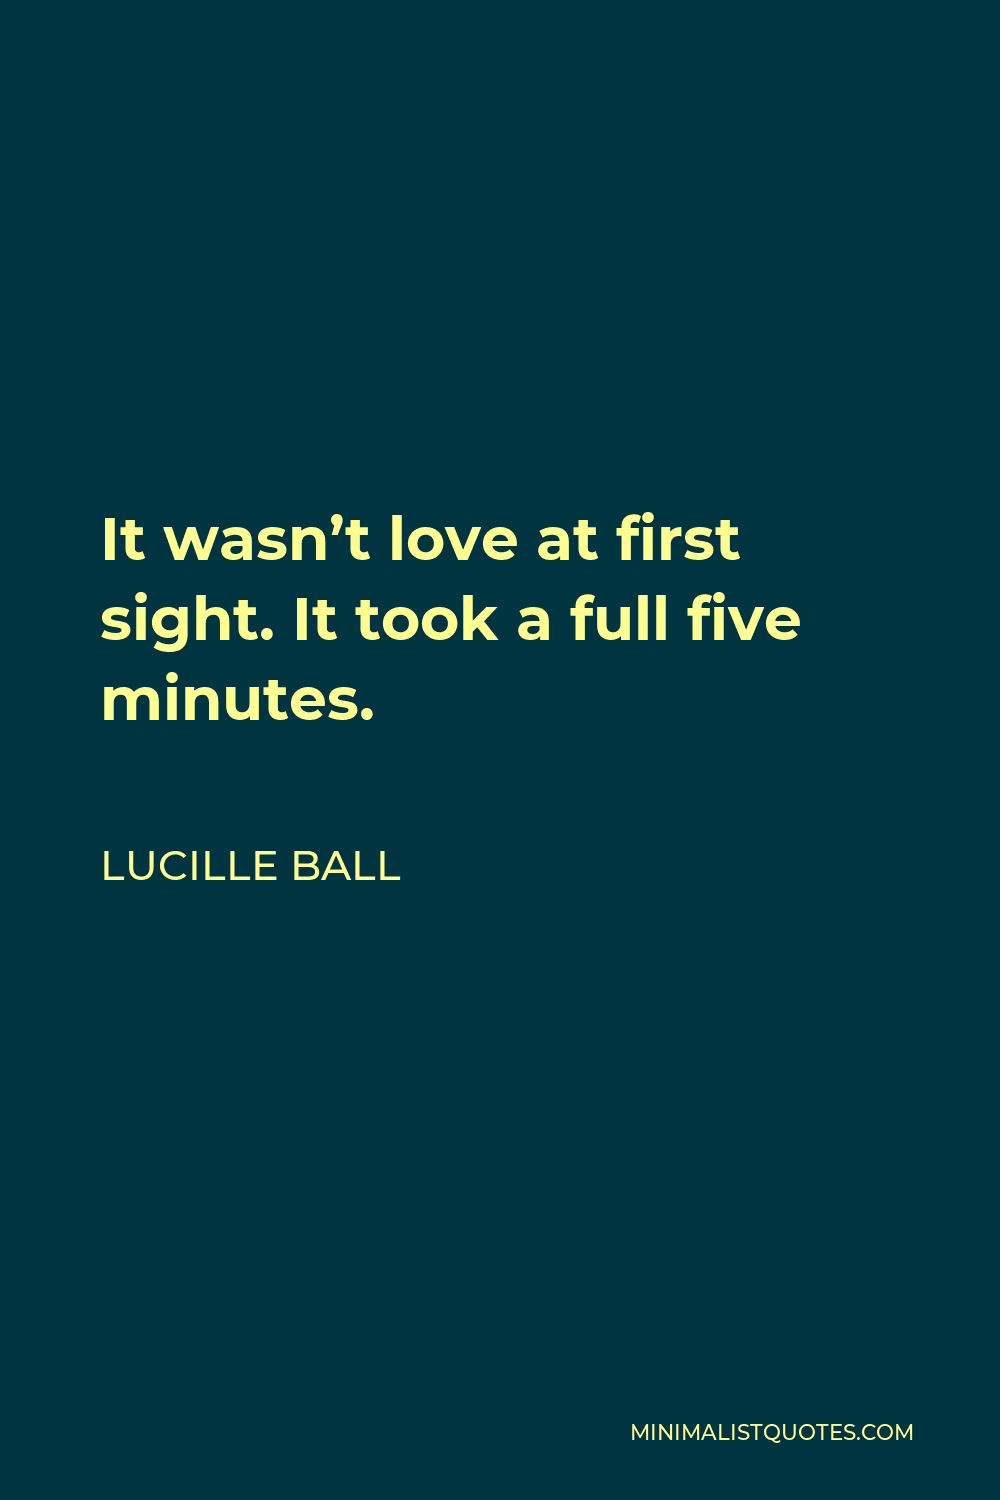 Lucille Ball Quote - It wasn’t love at first sight. It took a full five minutes.